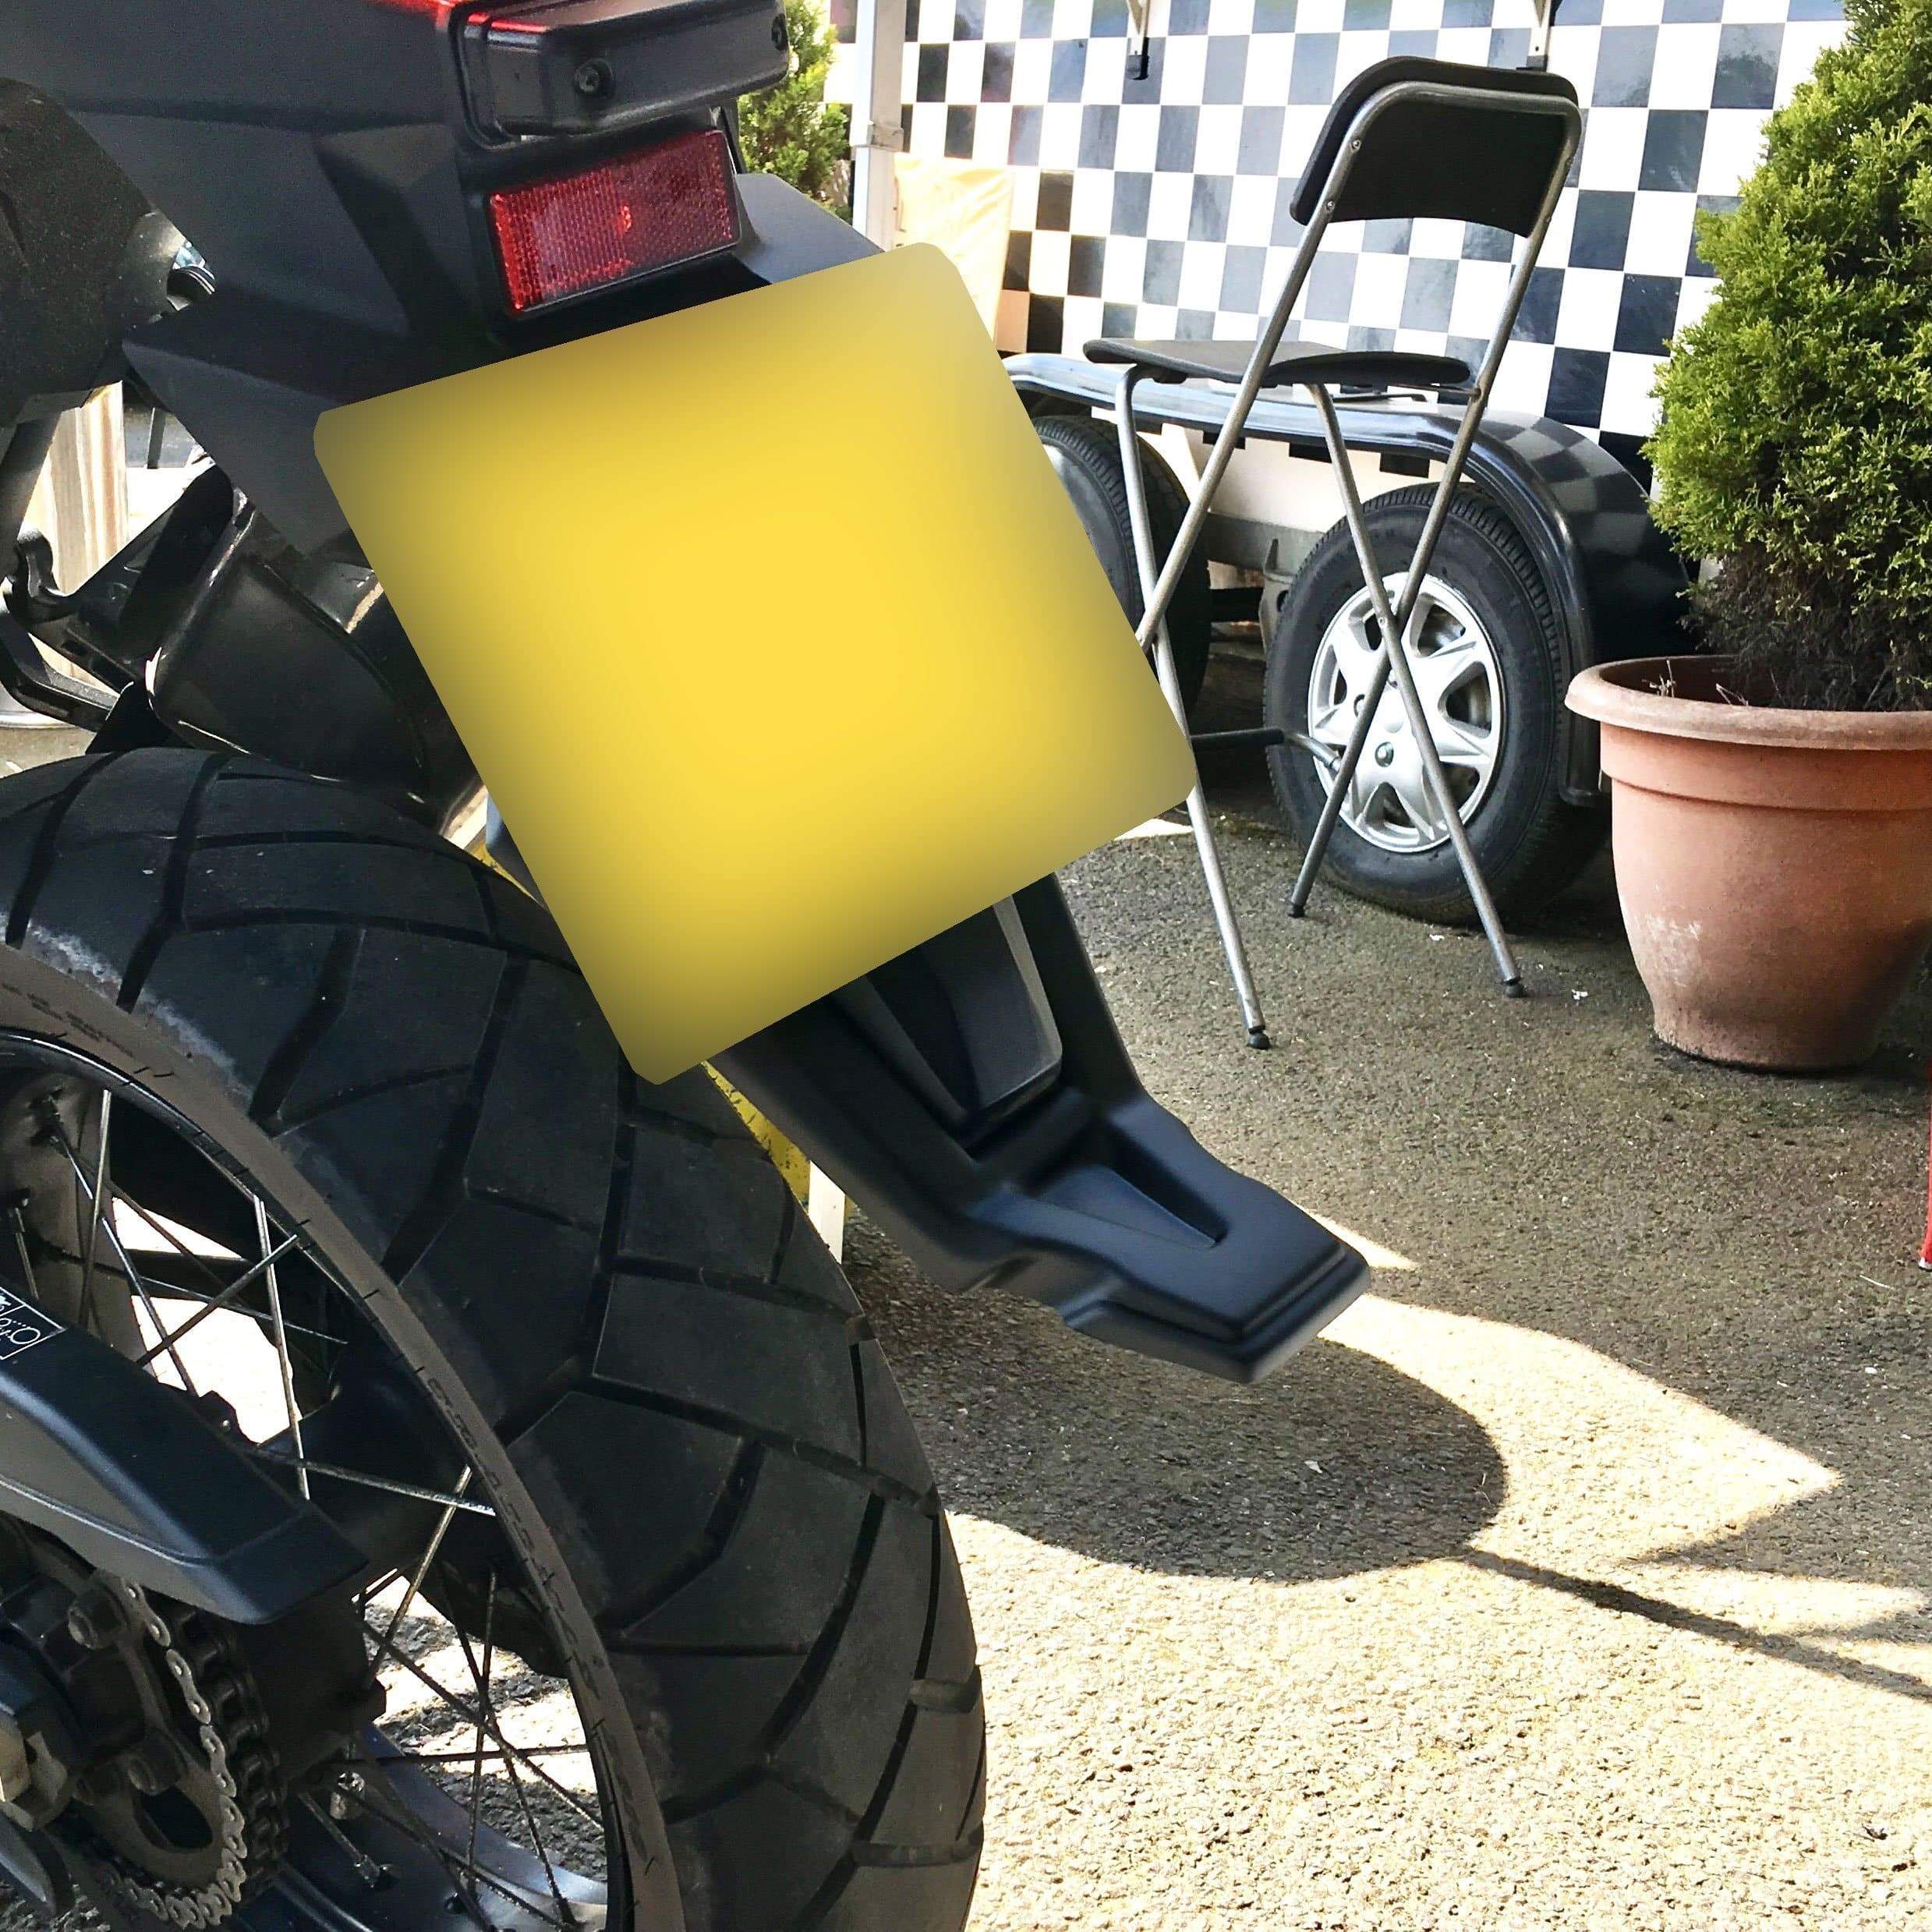 Pyramid Ductail | Matte Black | Honda CRF 1000 L Africa Twin Adventure Sports 2018>2019-08123-Ductails-Pyramid Plastics